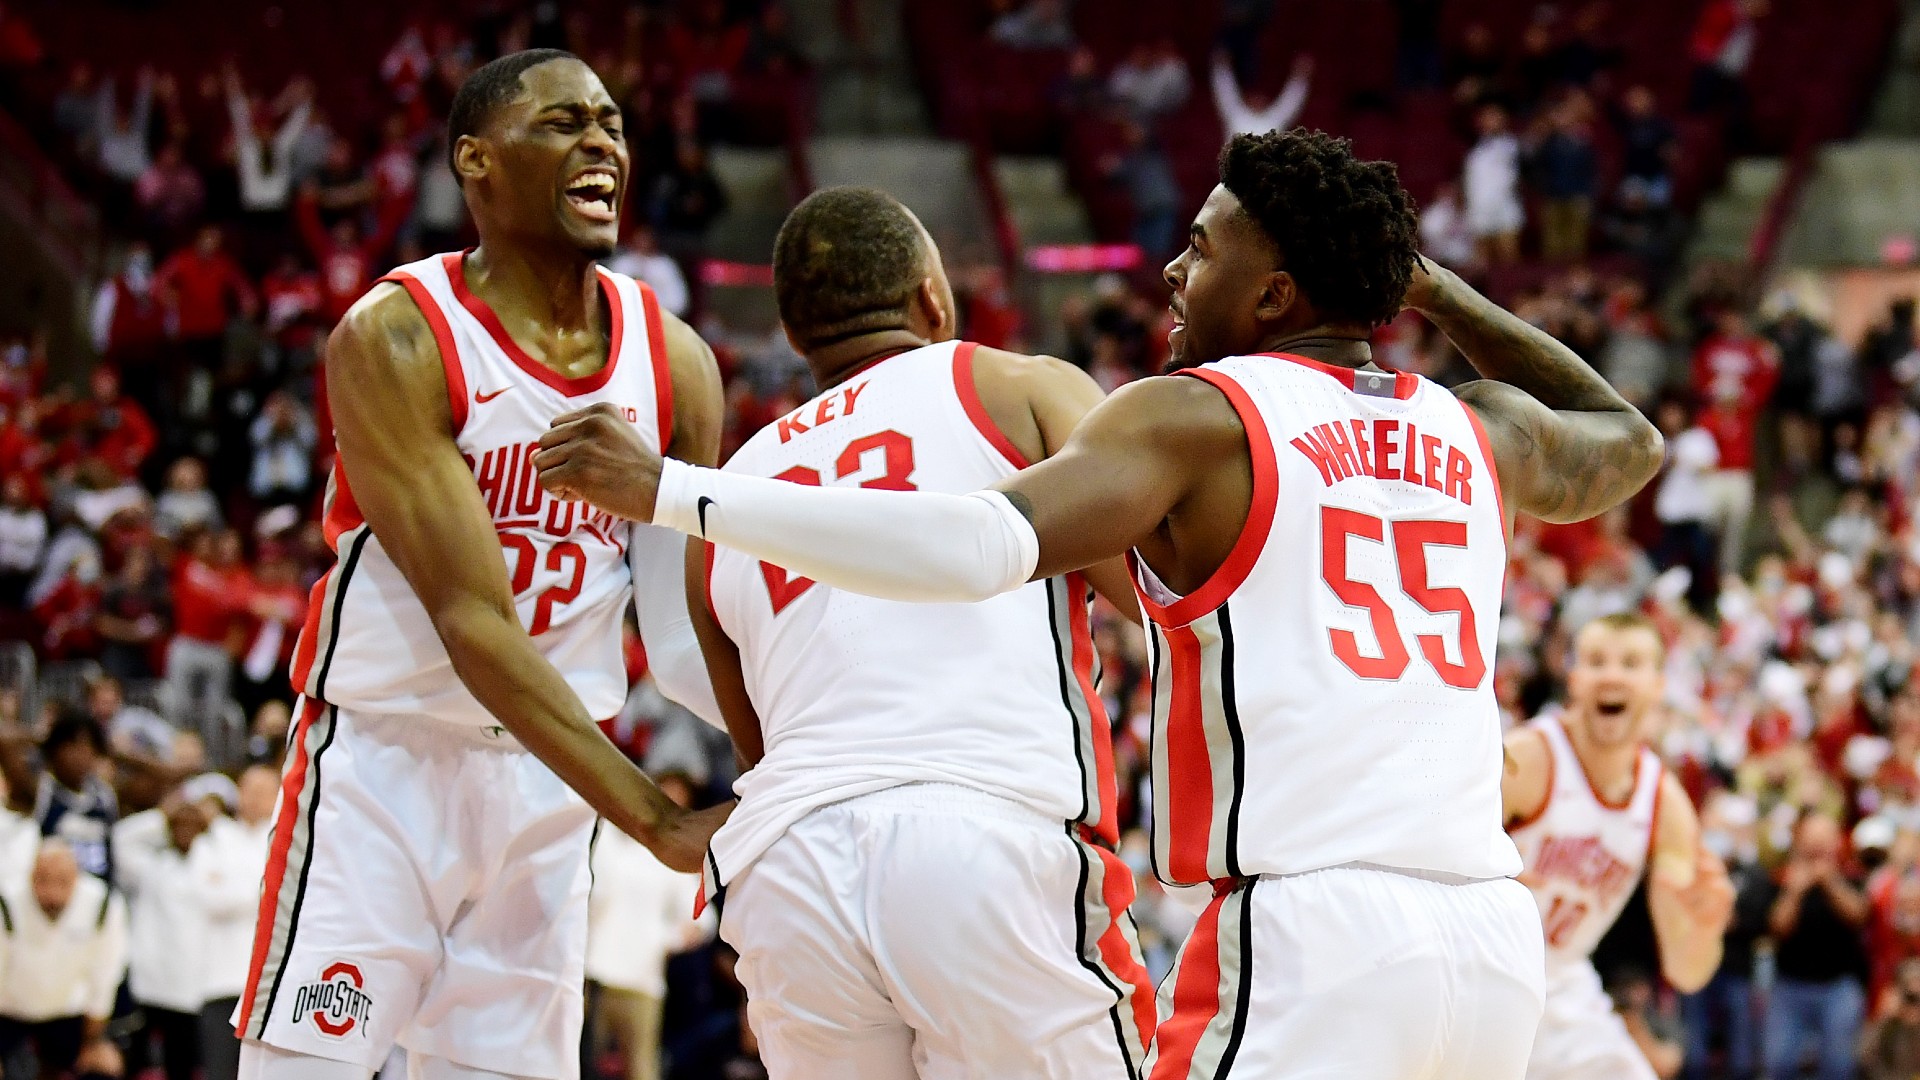 Ohio State vs. Xavier Odds & Picks: Will Buckeyes Come Up With Road College Basketball Win? article feature image